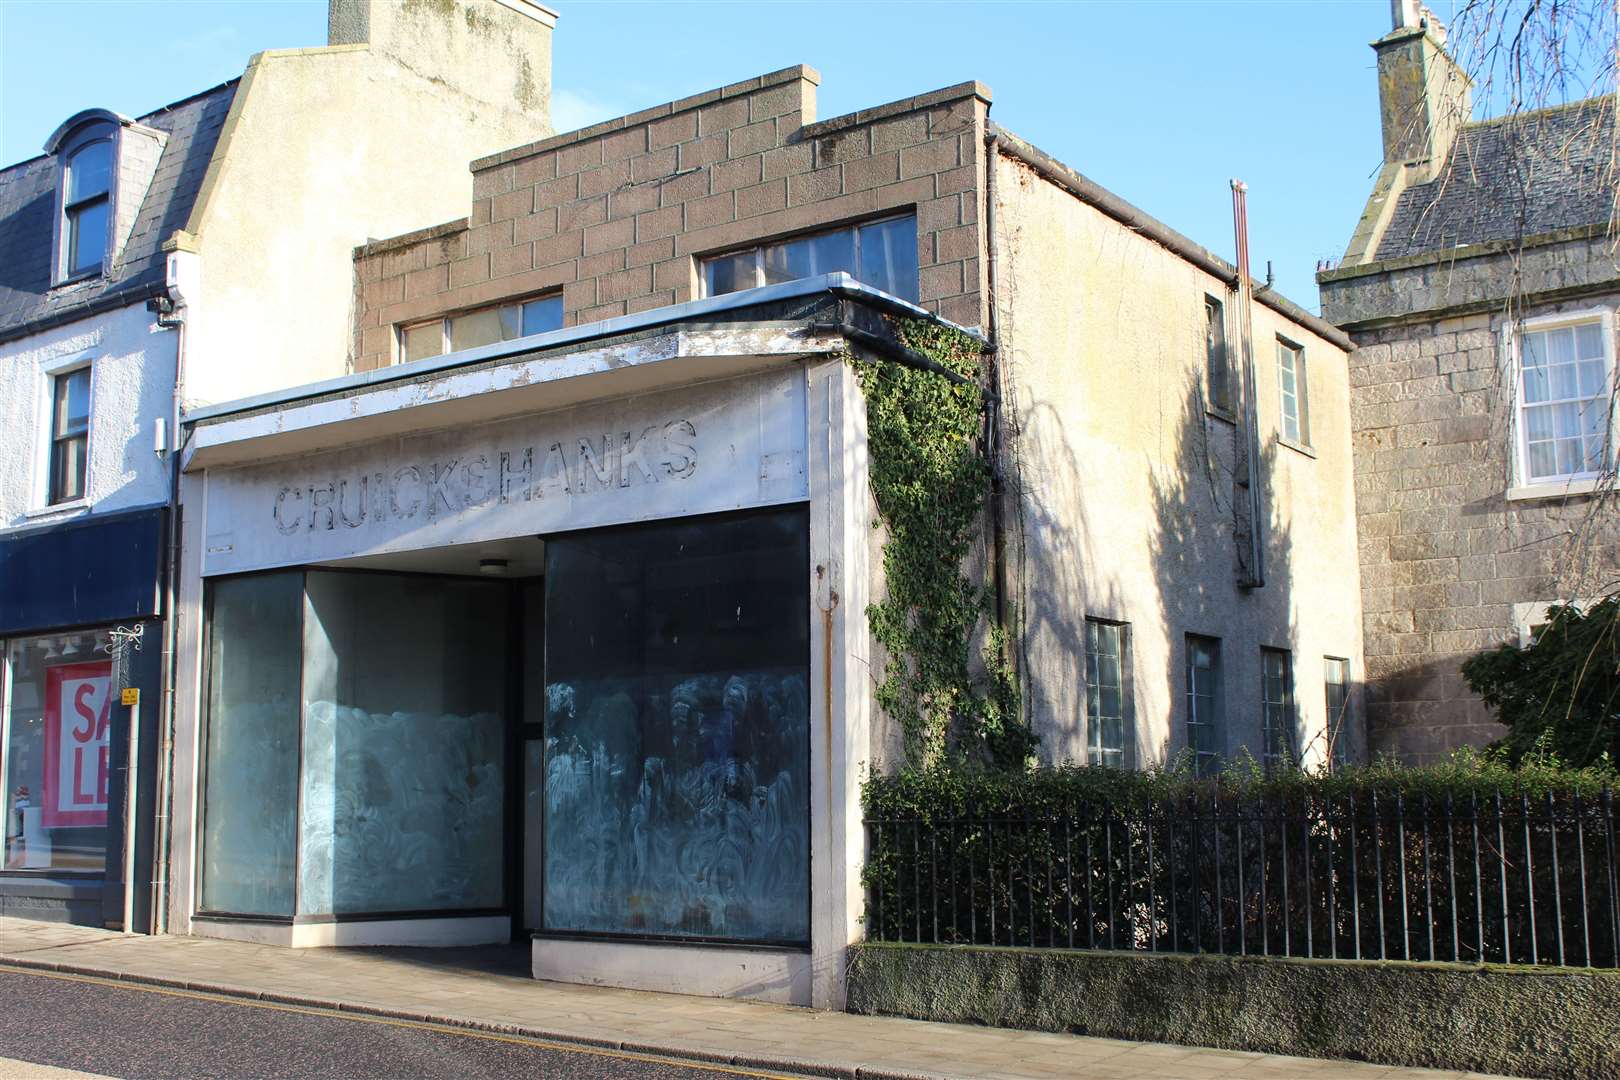 A proposal to turn the former Cruickshanks store in Banff into flats has been resubmitted.